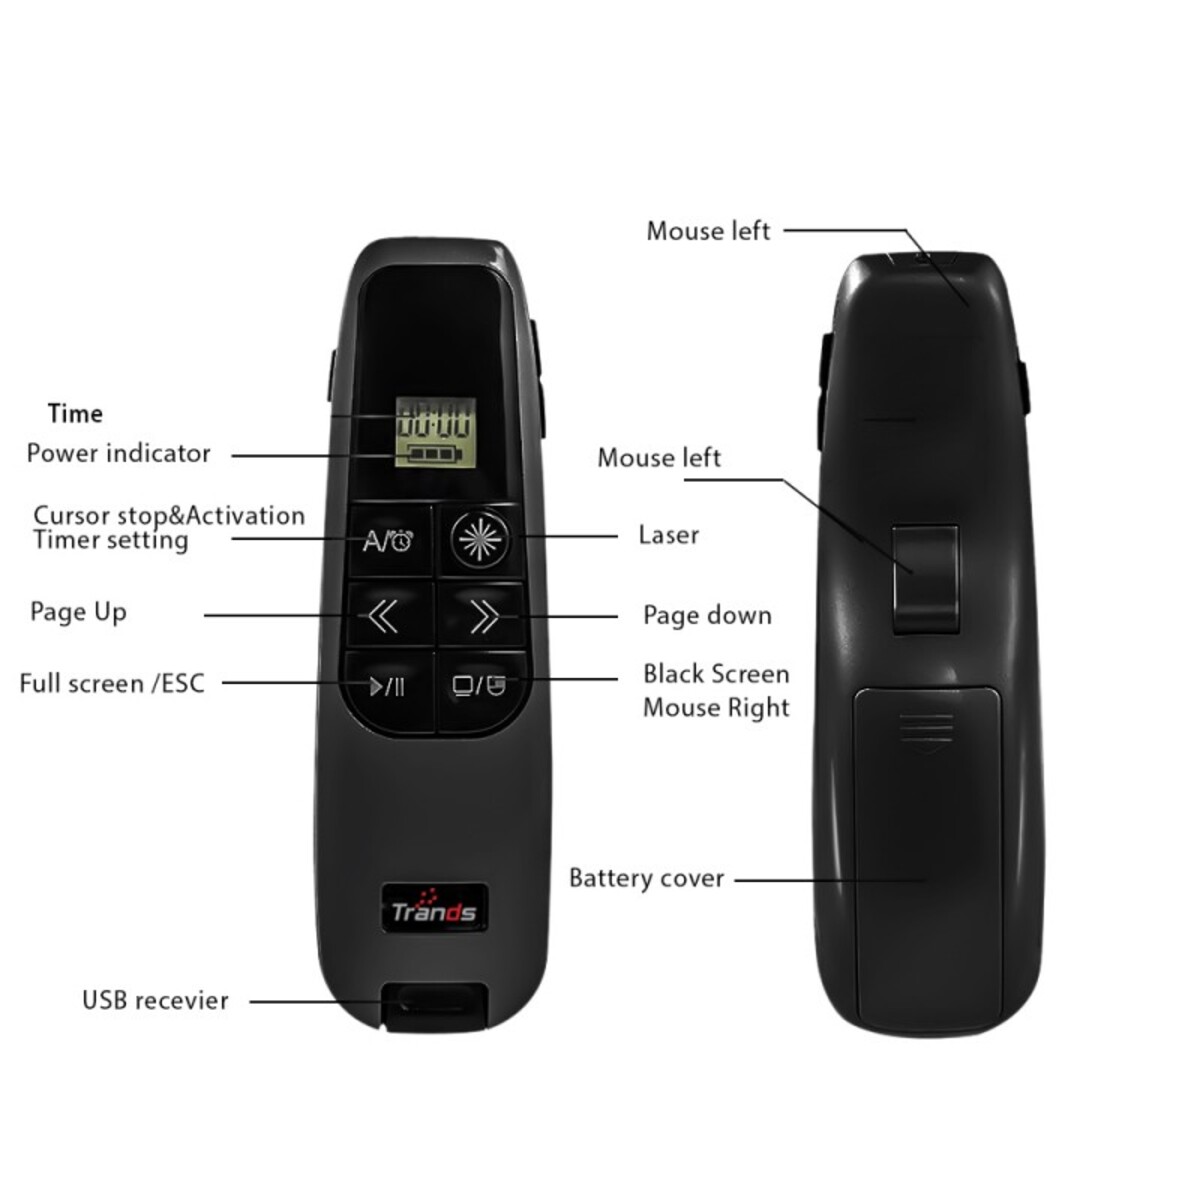 Trands Wireless Presenter With Air Mouse Timer WP4329